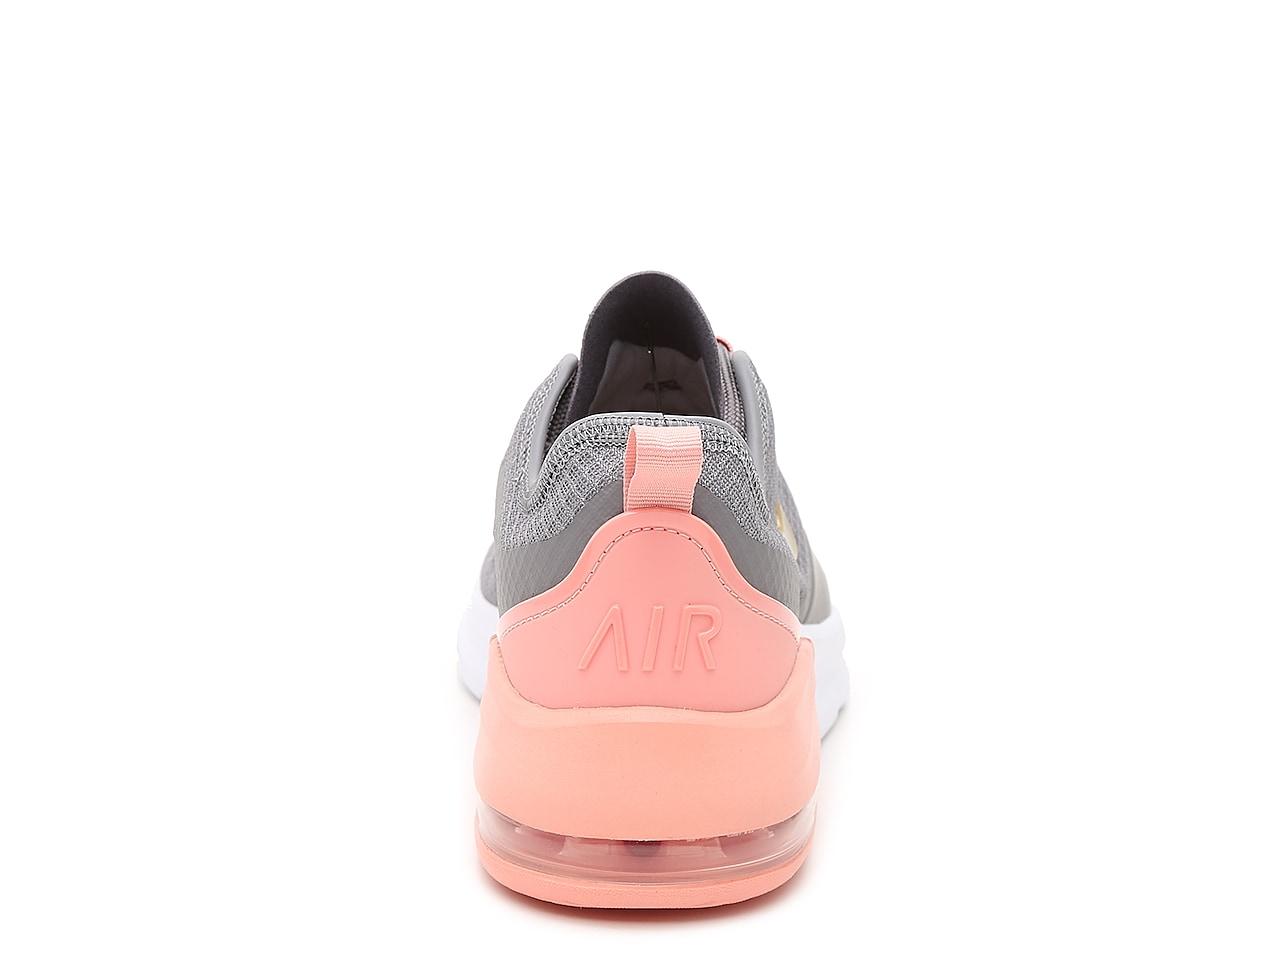 Nike Air Max Motion 2 Shoes in Grey/Peach (Gray) - Lyst